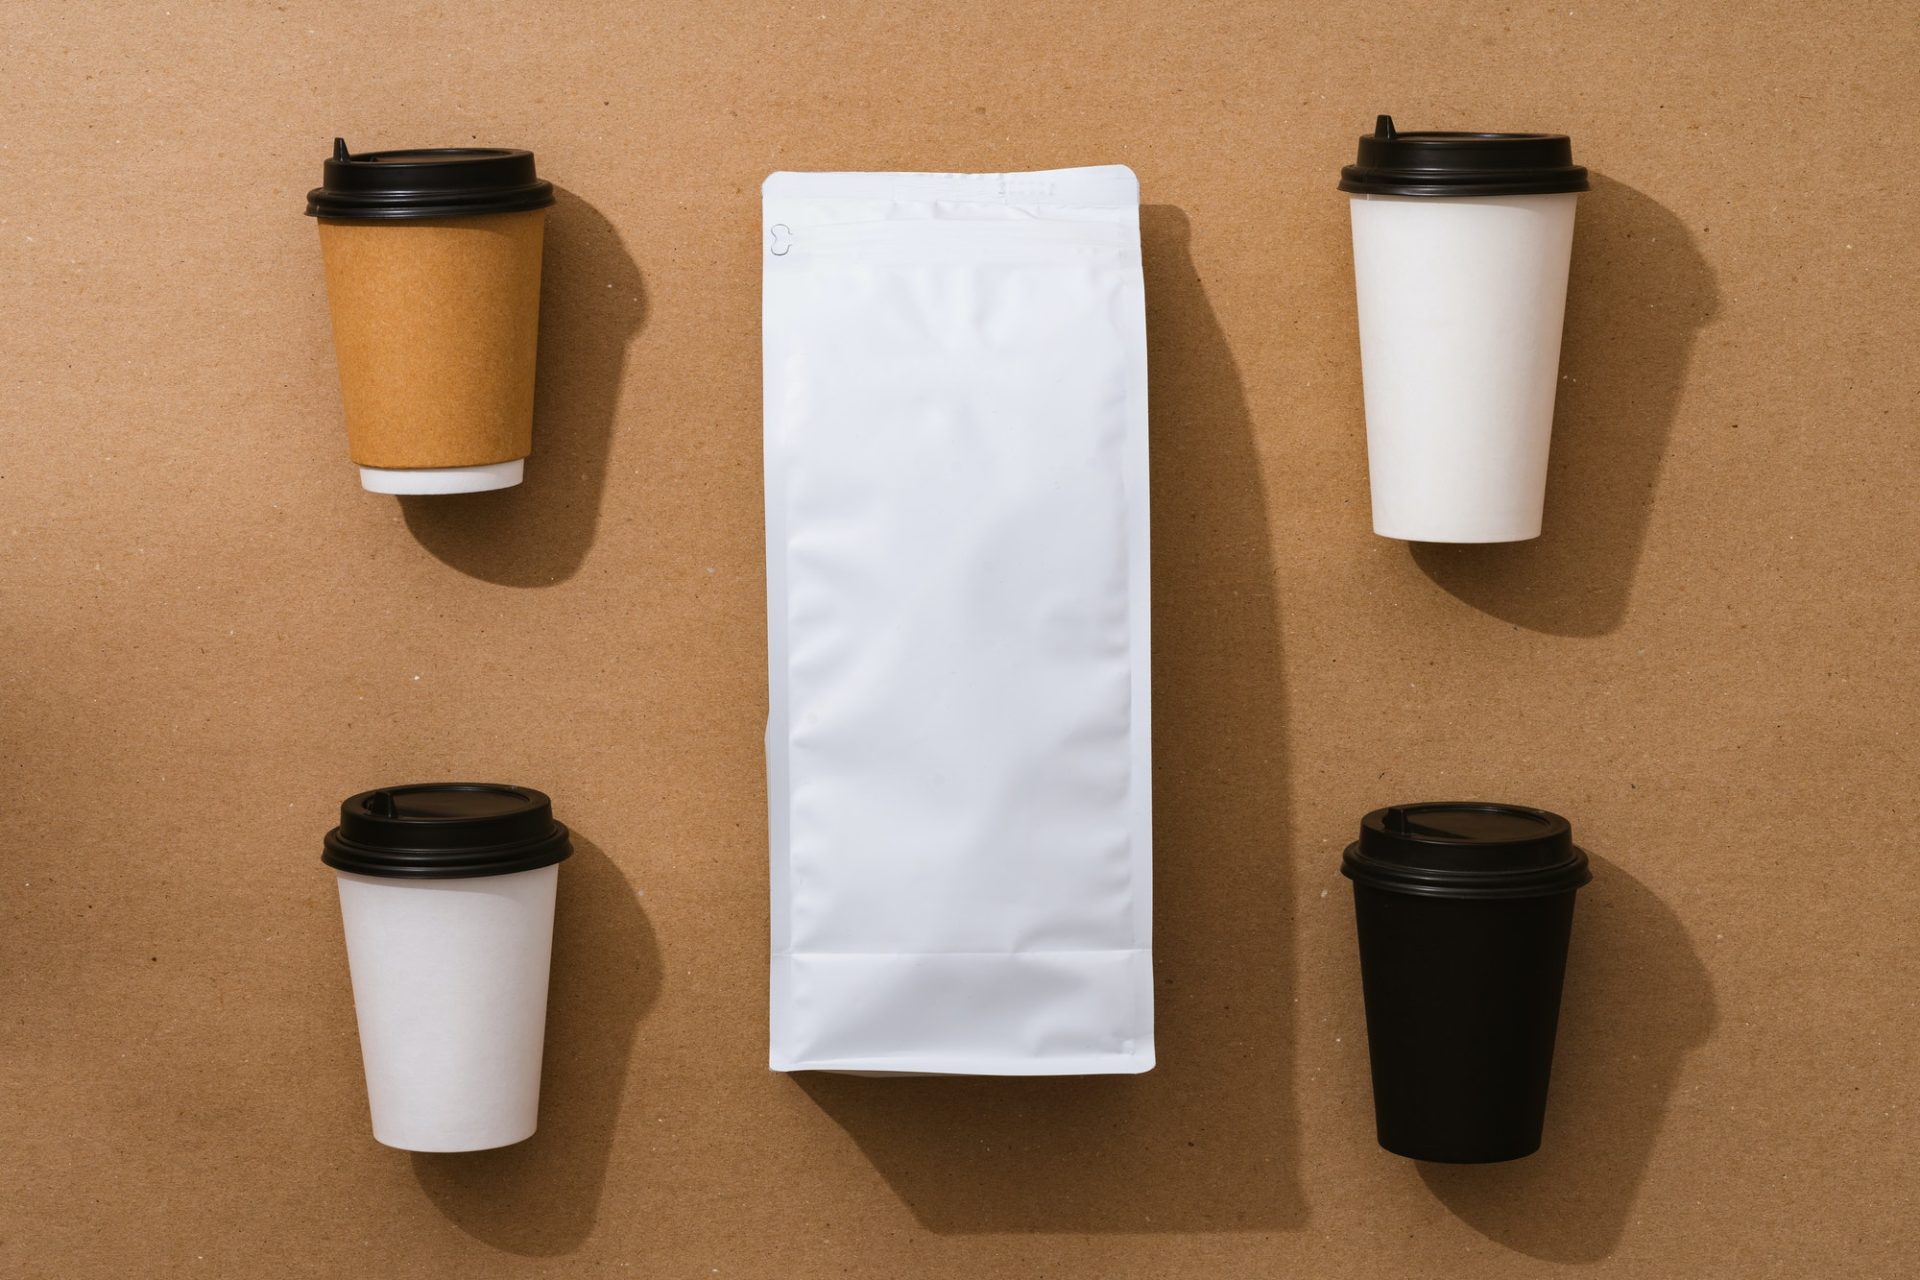 Blank coffee package with copy space and takeout cups on beige background